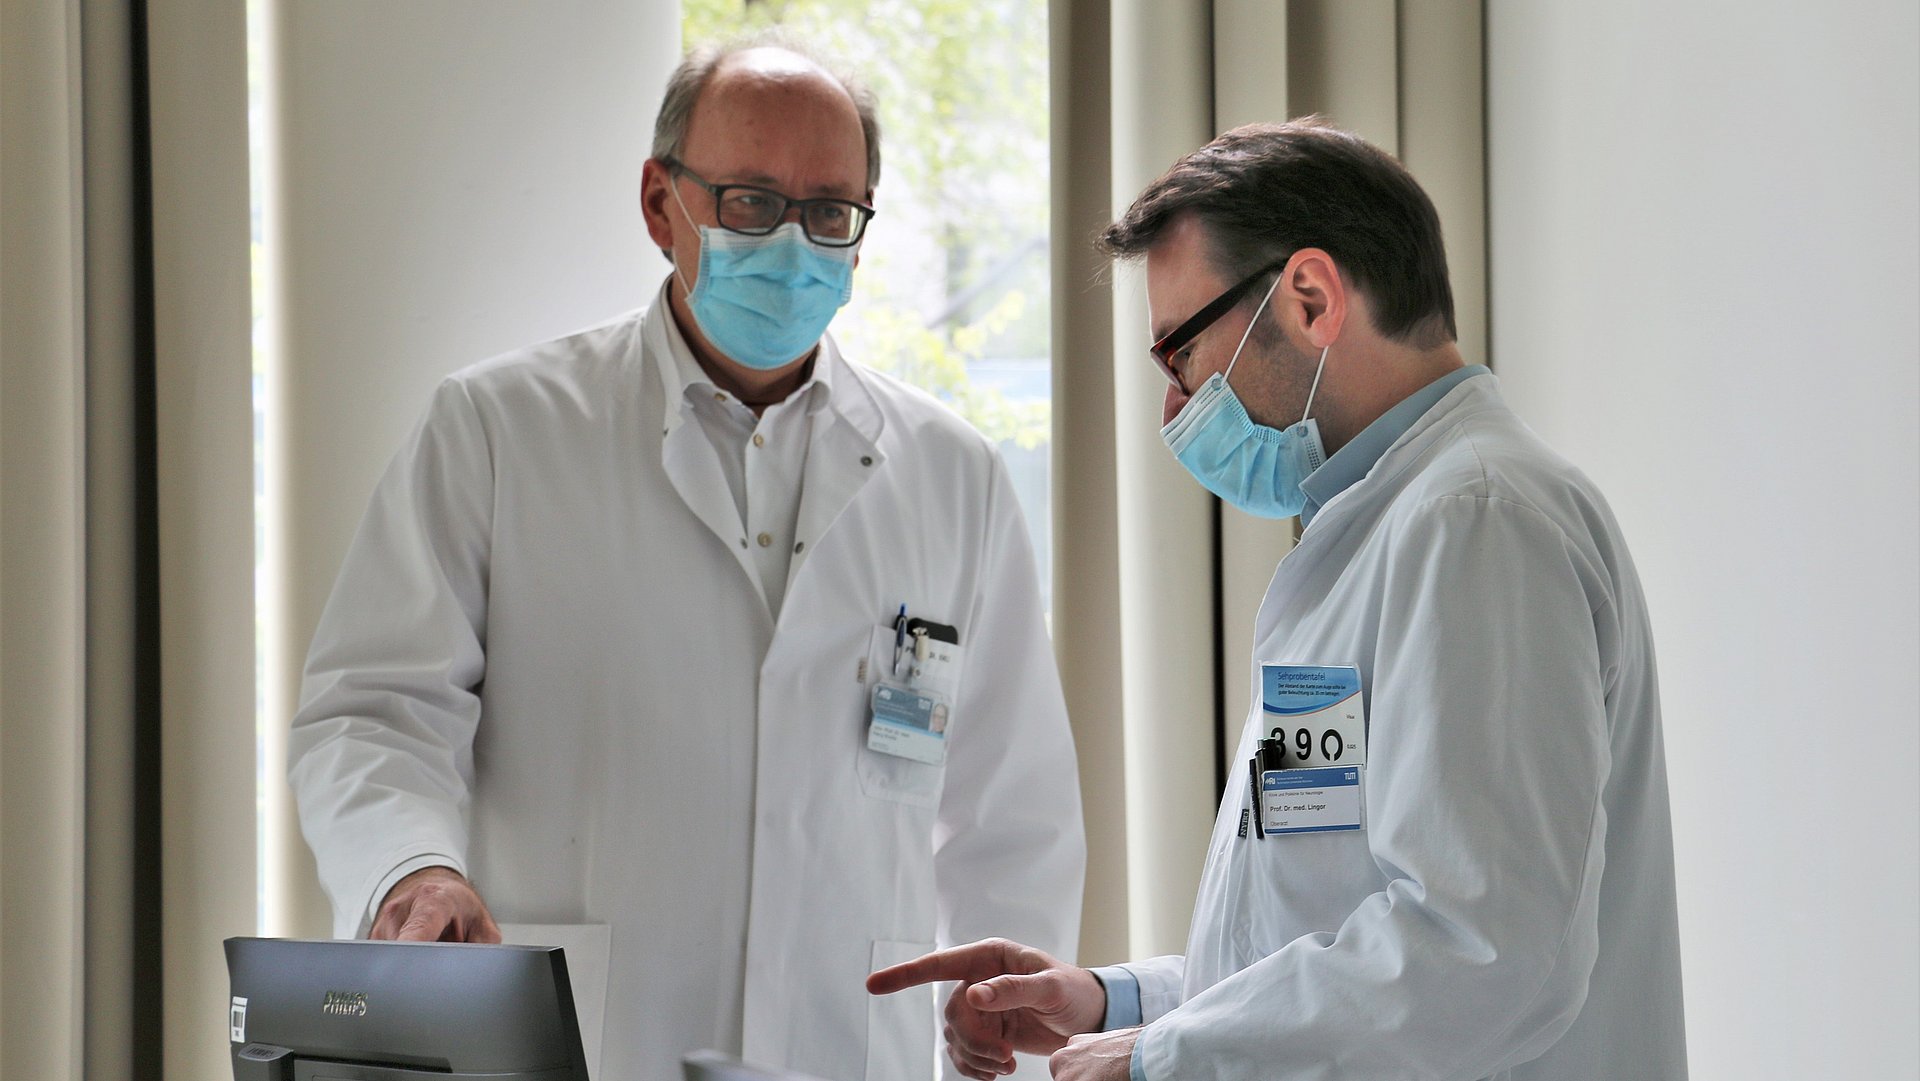 Prof. Knolle (l.) and Prof. Lingor (r.) lead the antibody study for employees of the university hospital Klinikum rechts der Isar.